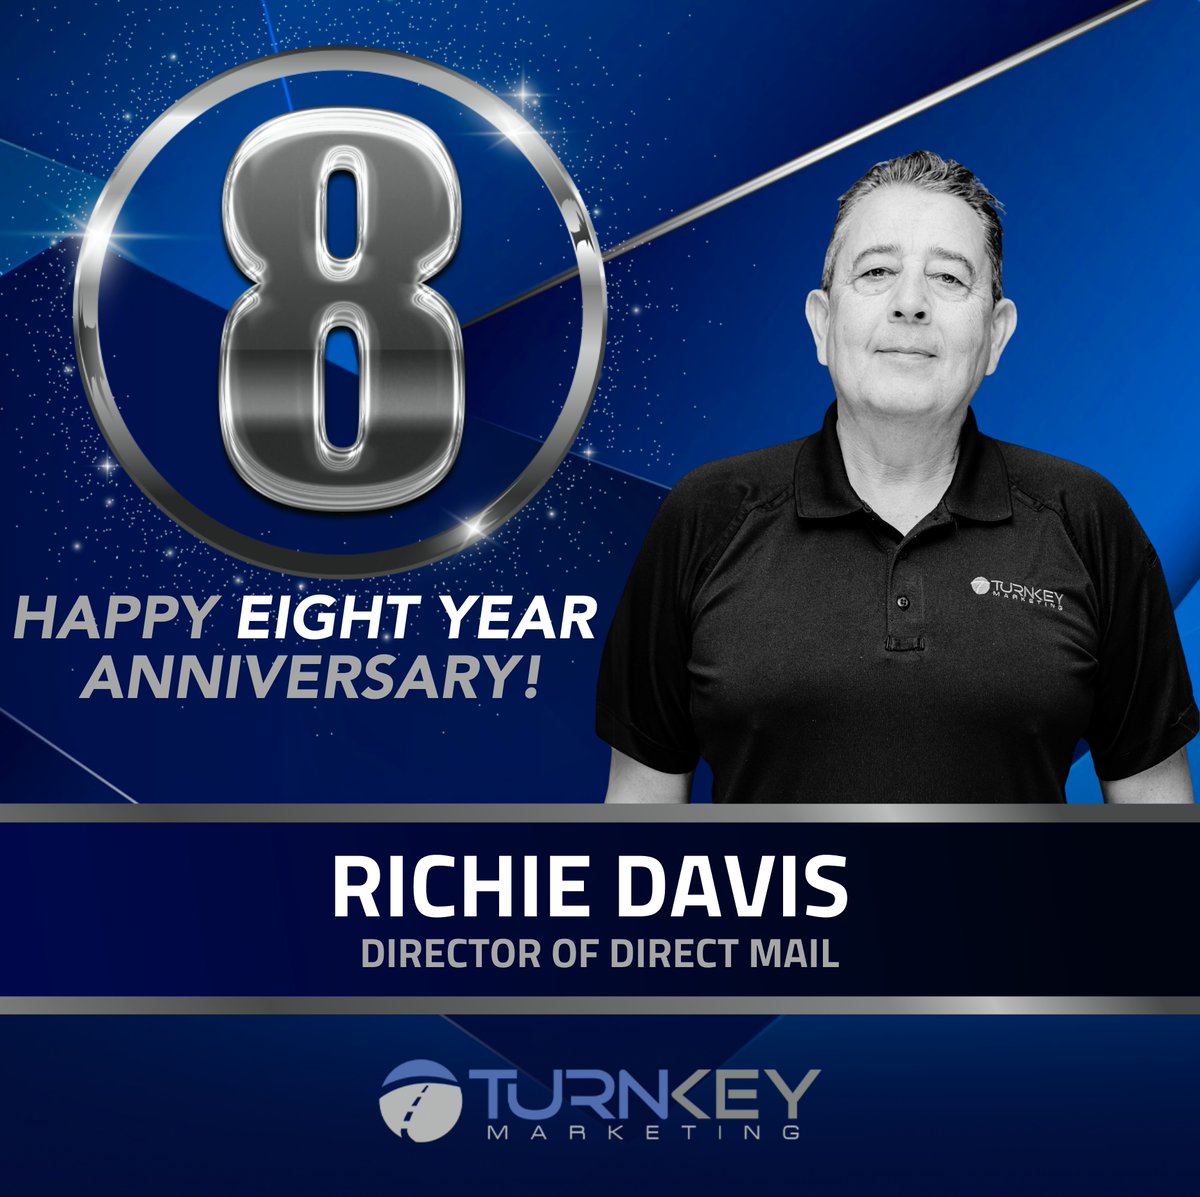 We would like to give a huge Congratulations to Richie Davis for 8 Years with us! 🎉 Richie, Happy TurnKey Marketing Anniversary and thank you for being with us. Cheers to another year full of growth and success 🥳👏 #DigitalMarketing #Anniversary #DirectMail #Agency #Tkmkt